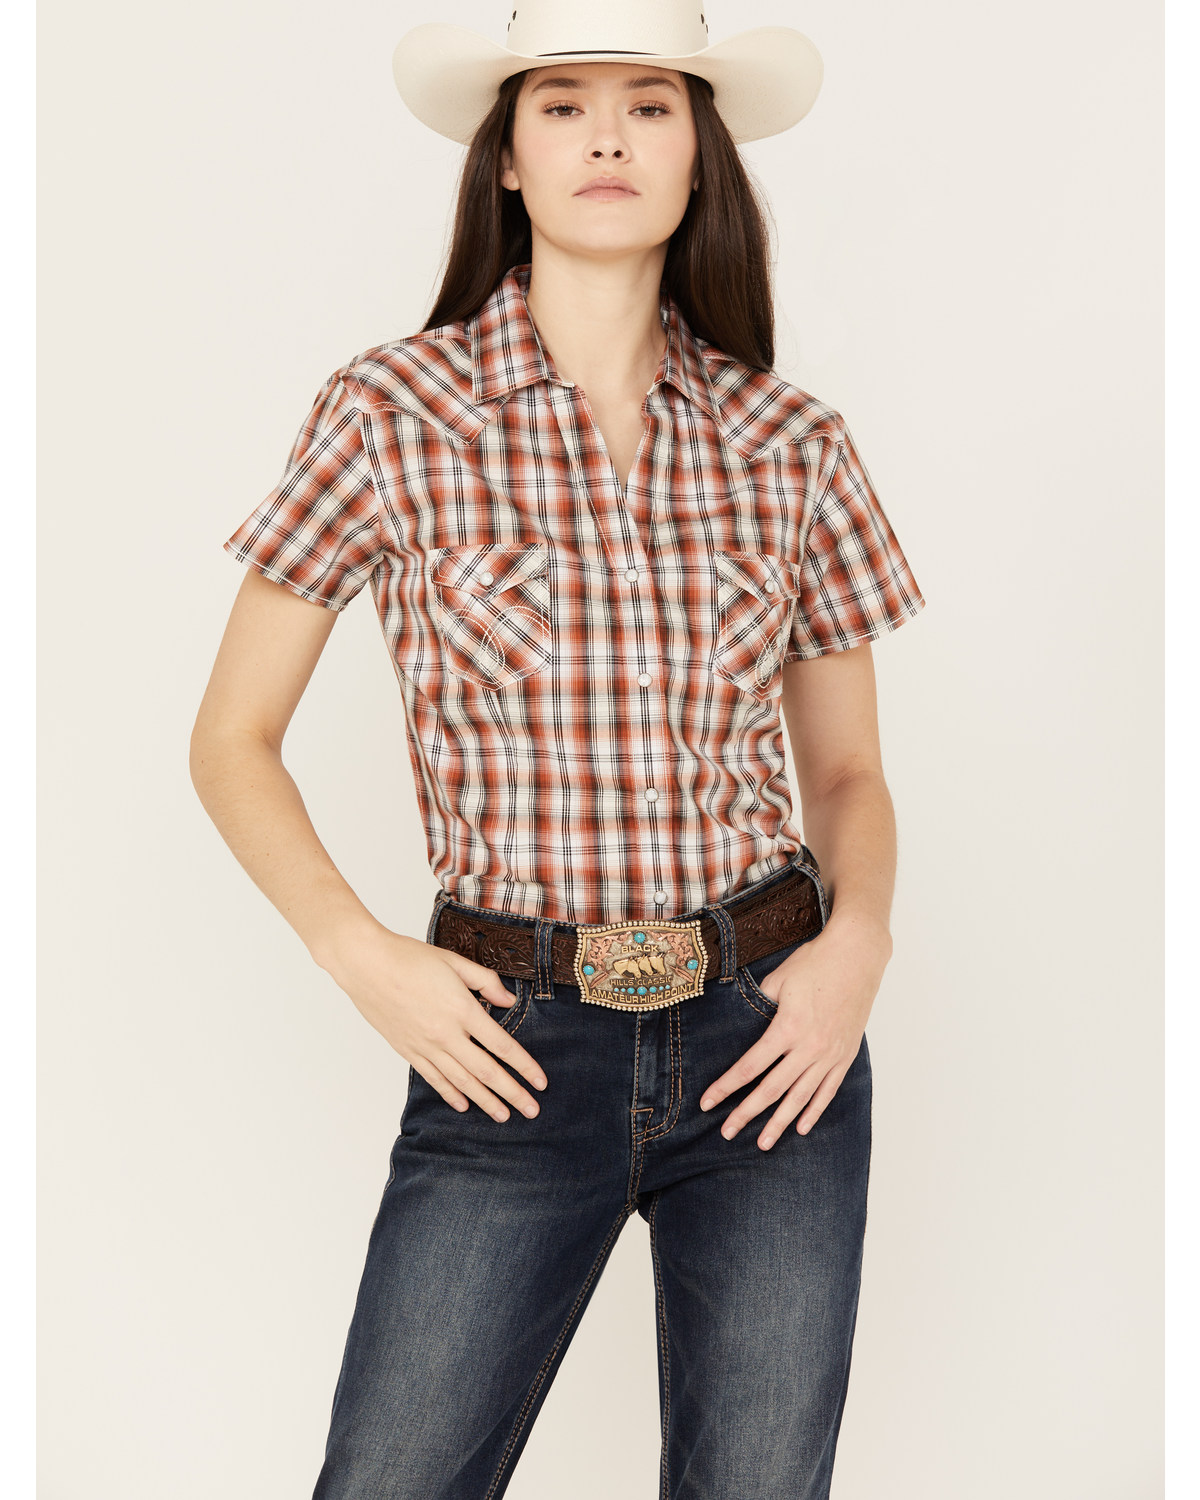 Rough Stock by Panhandle Women's Plaid Print Stretch Short Sleeve Western Snap Shirt